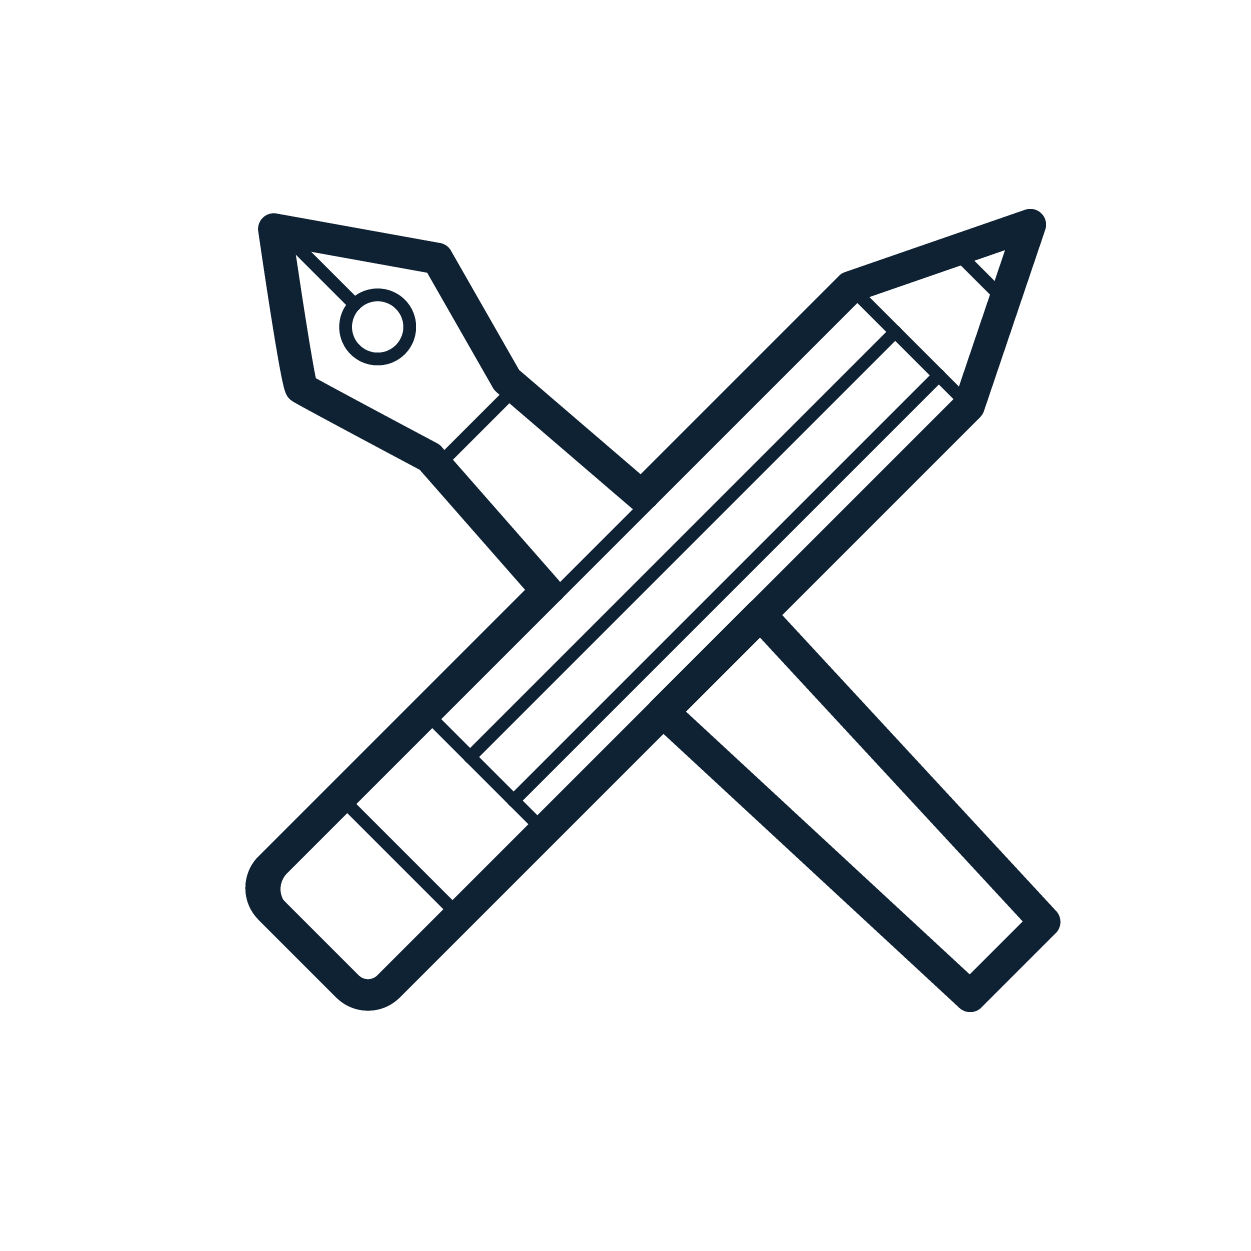 pencil icon crossed over a pen tool icon